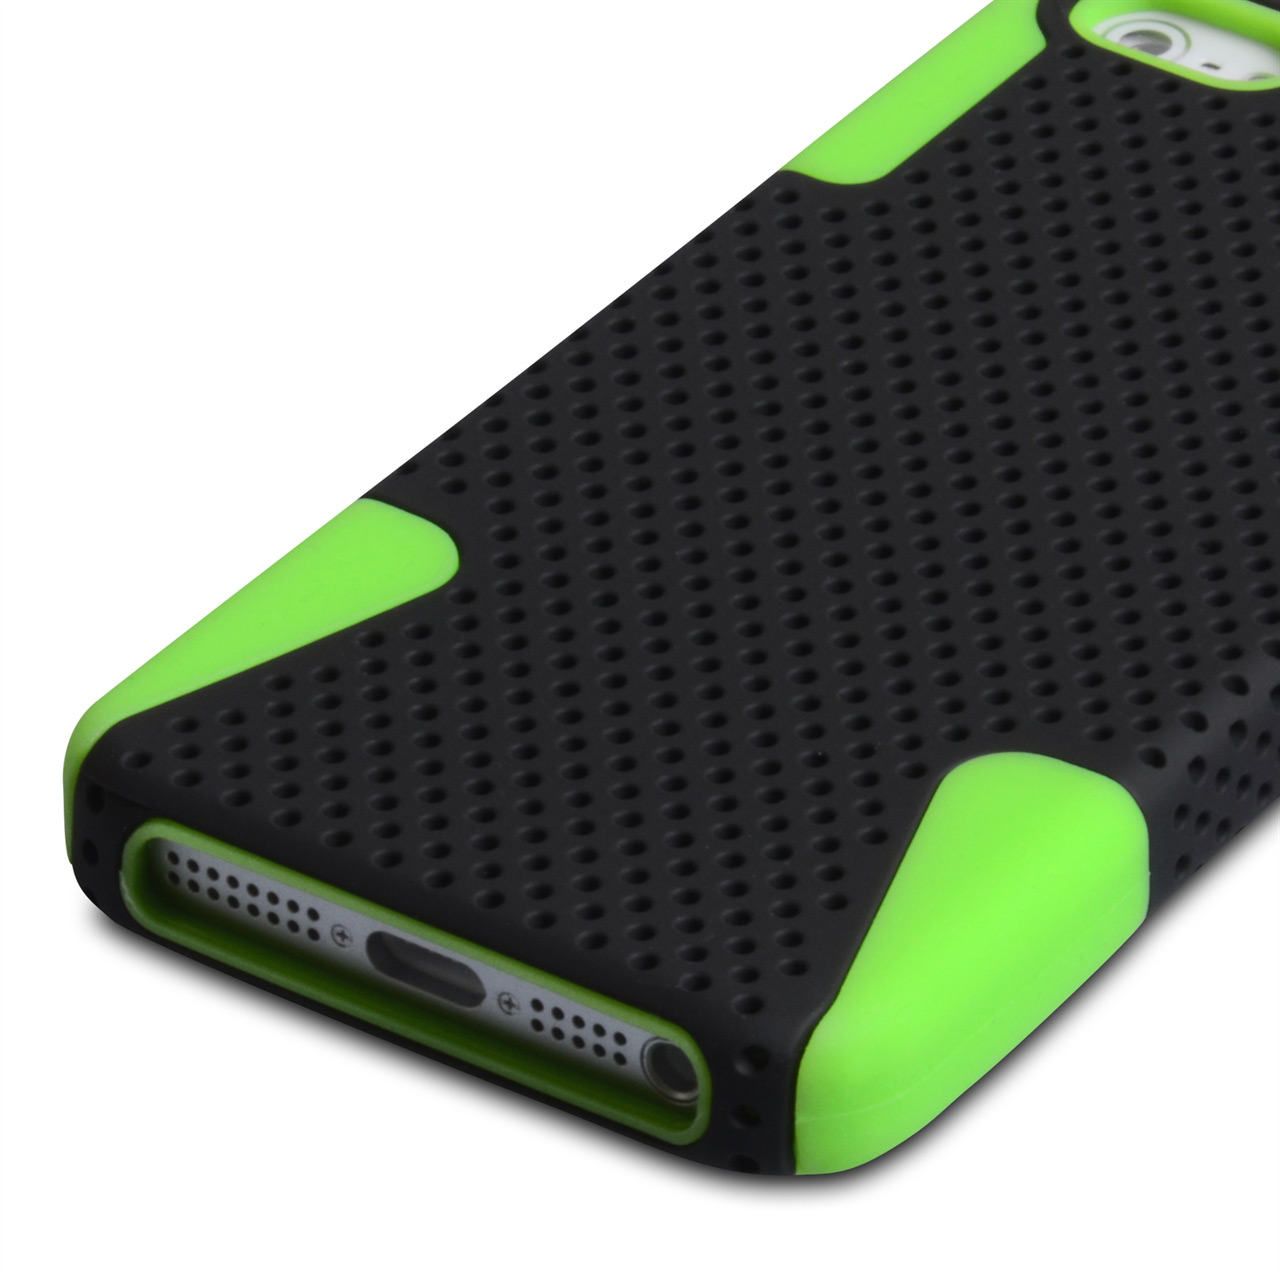 YouSave Accessories iPhone 5 and 5s Mesh Combo Case - Green1280 x 1280